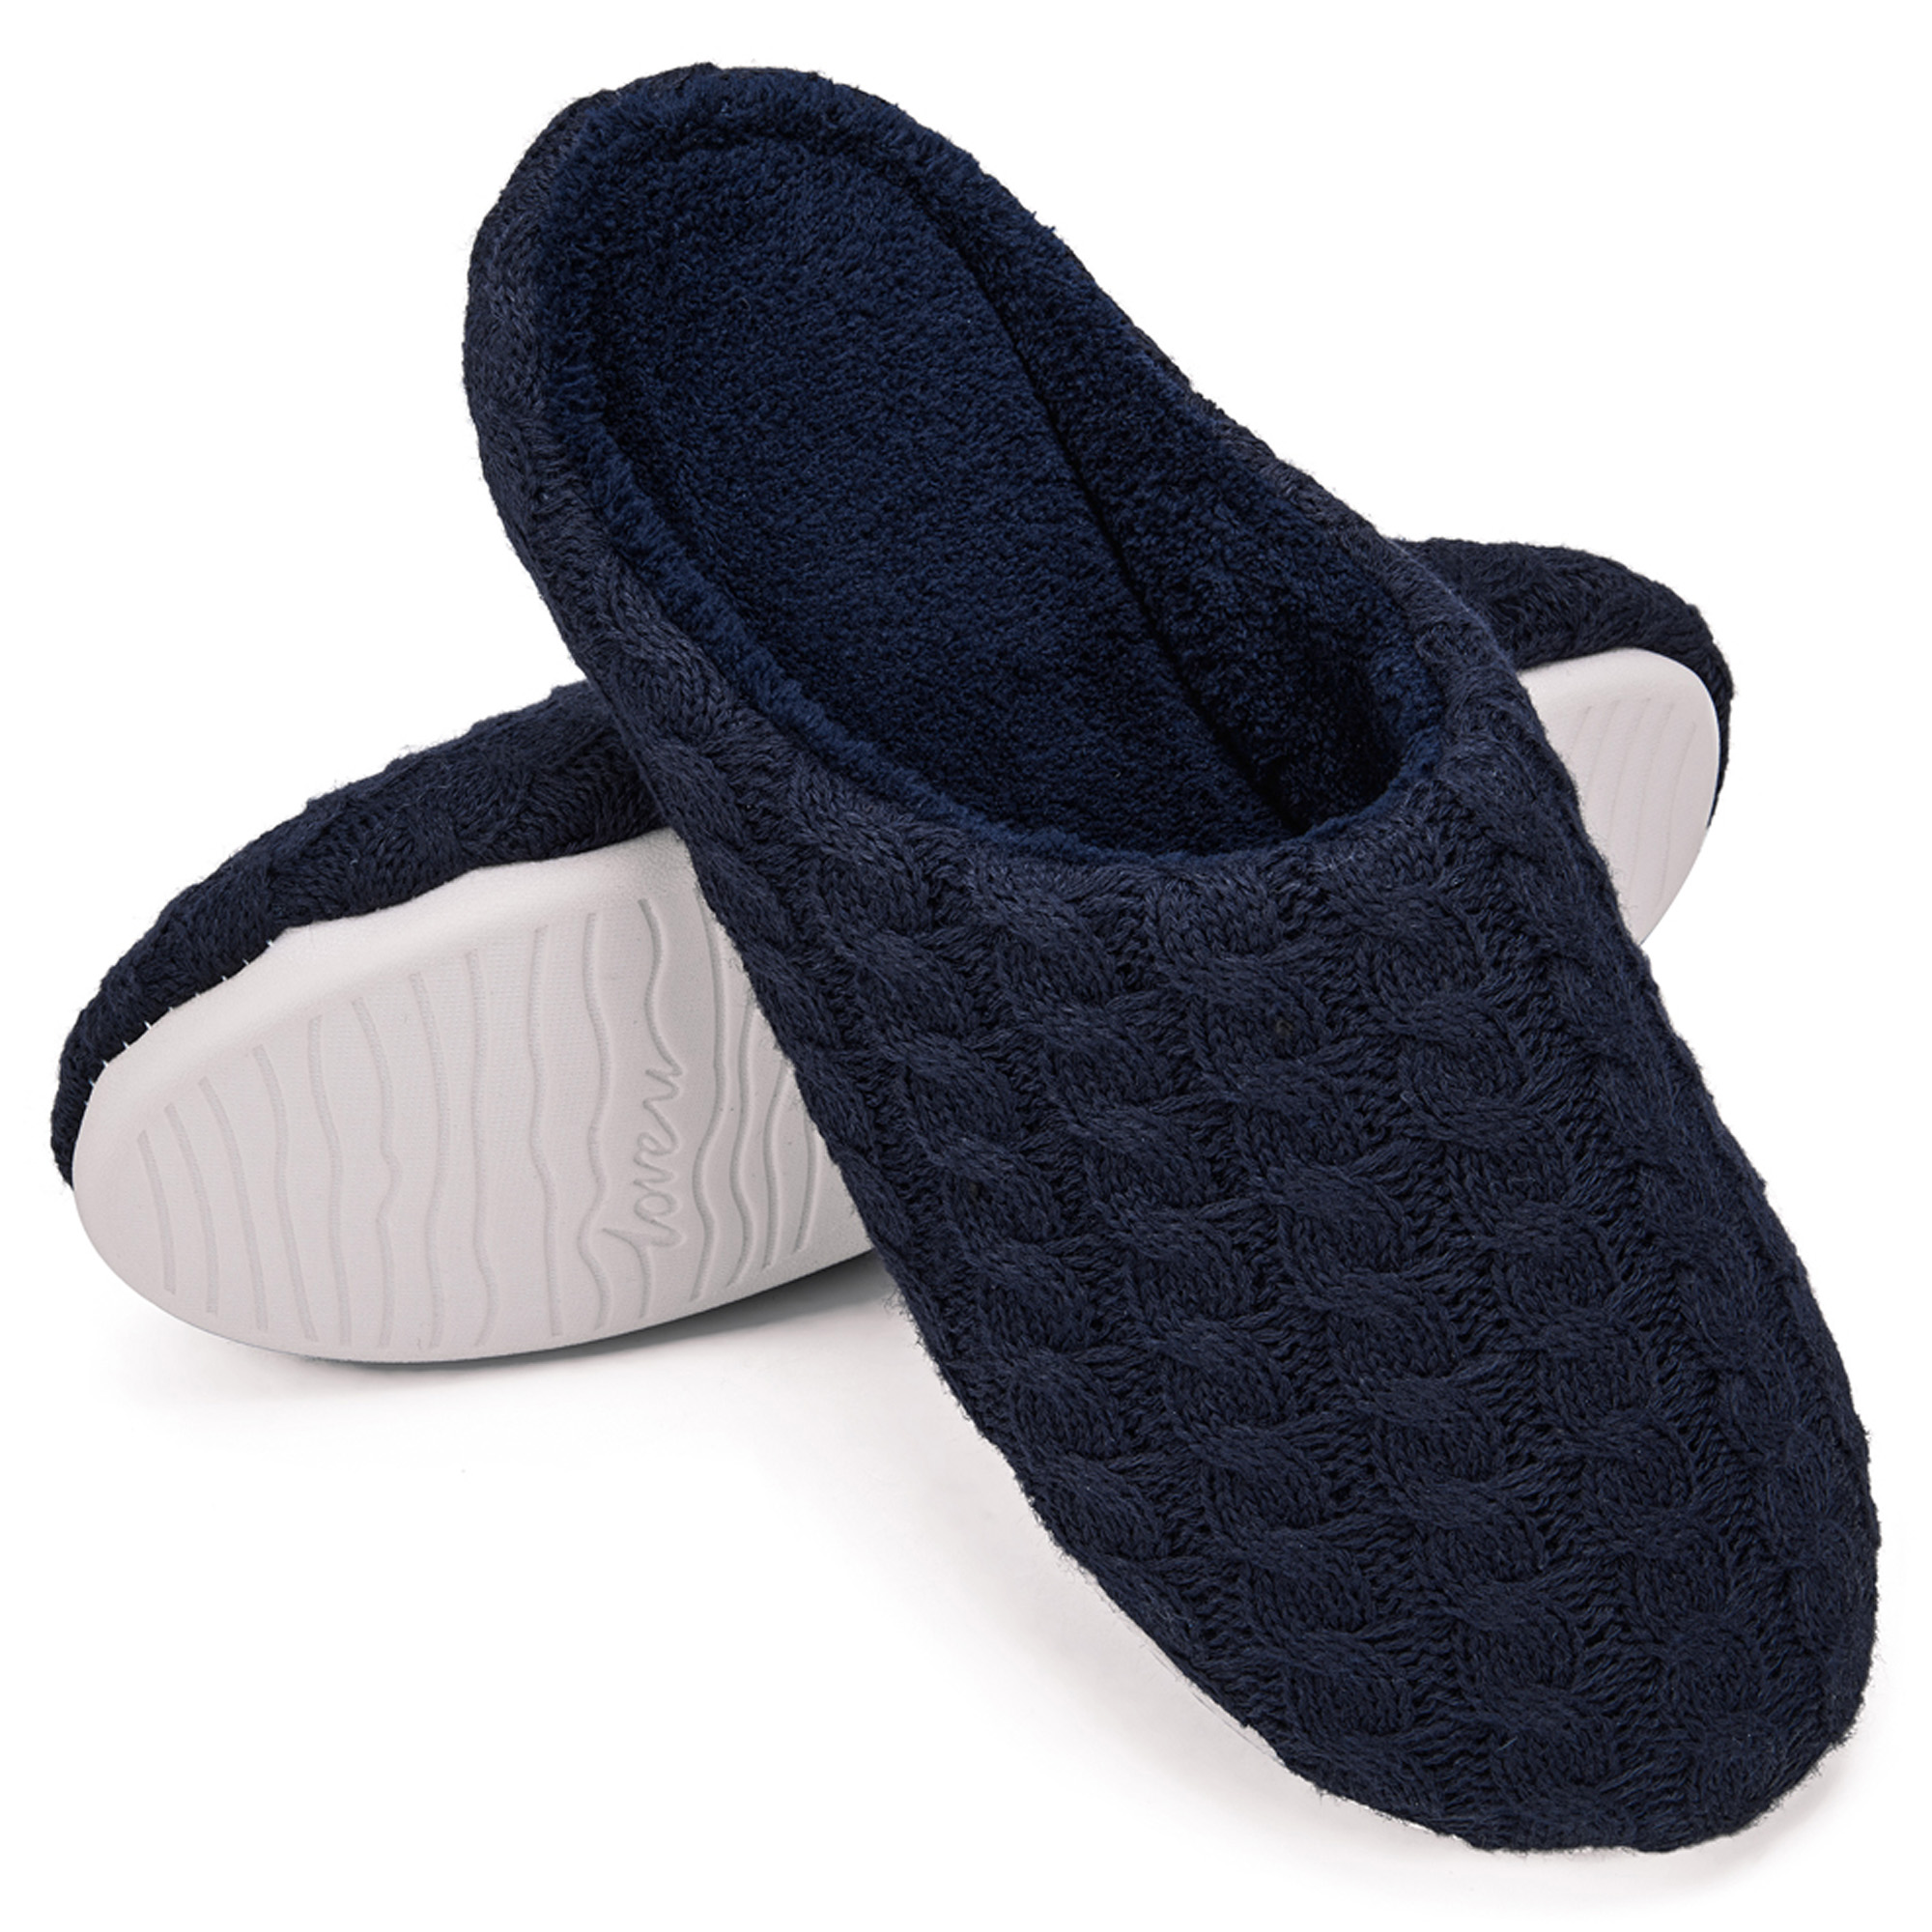 DODOING Women's Memory Foam Insole Breathable Cotton Upper Slippers with Cozy Short Plush Lining - image 1 of 8